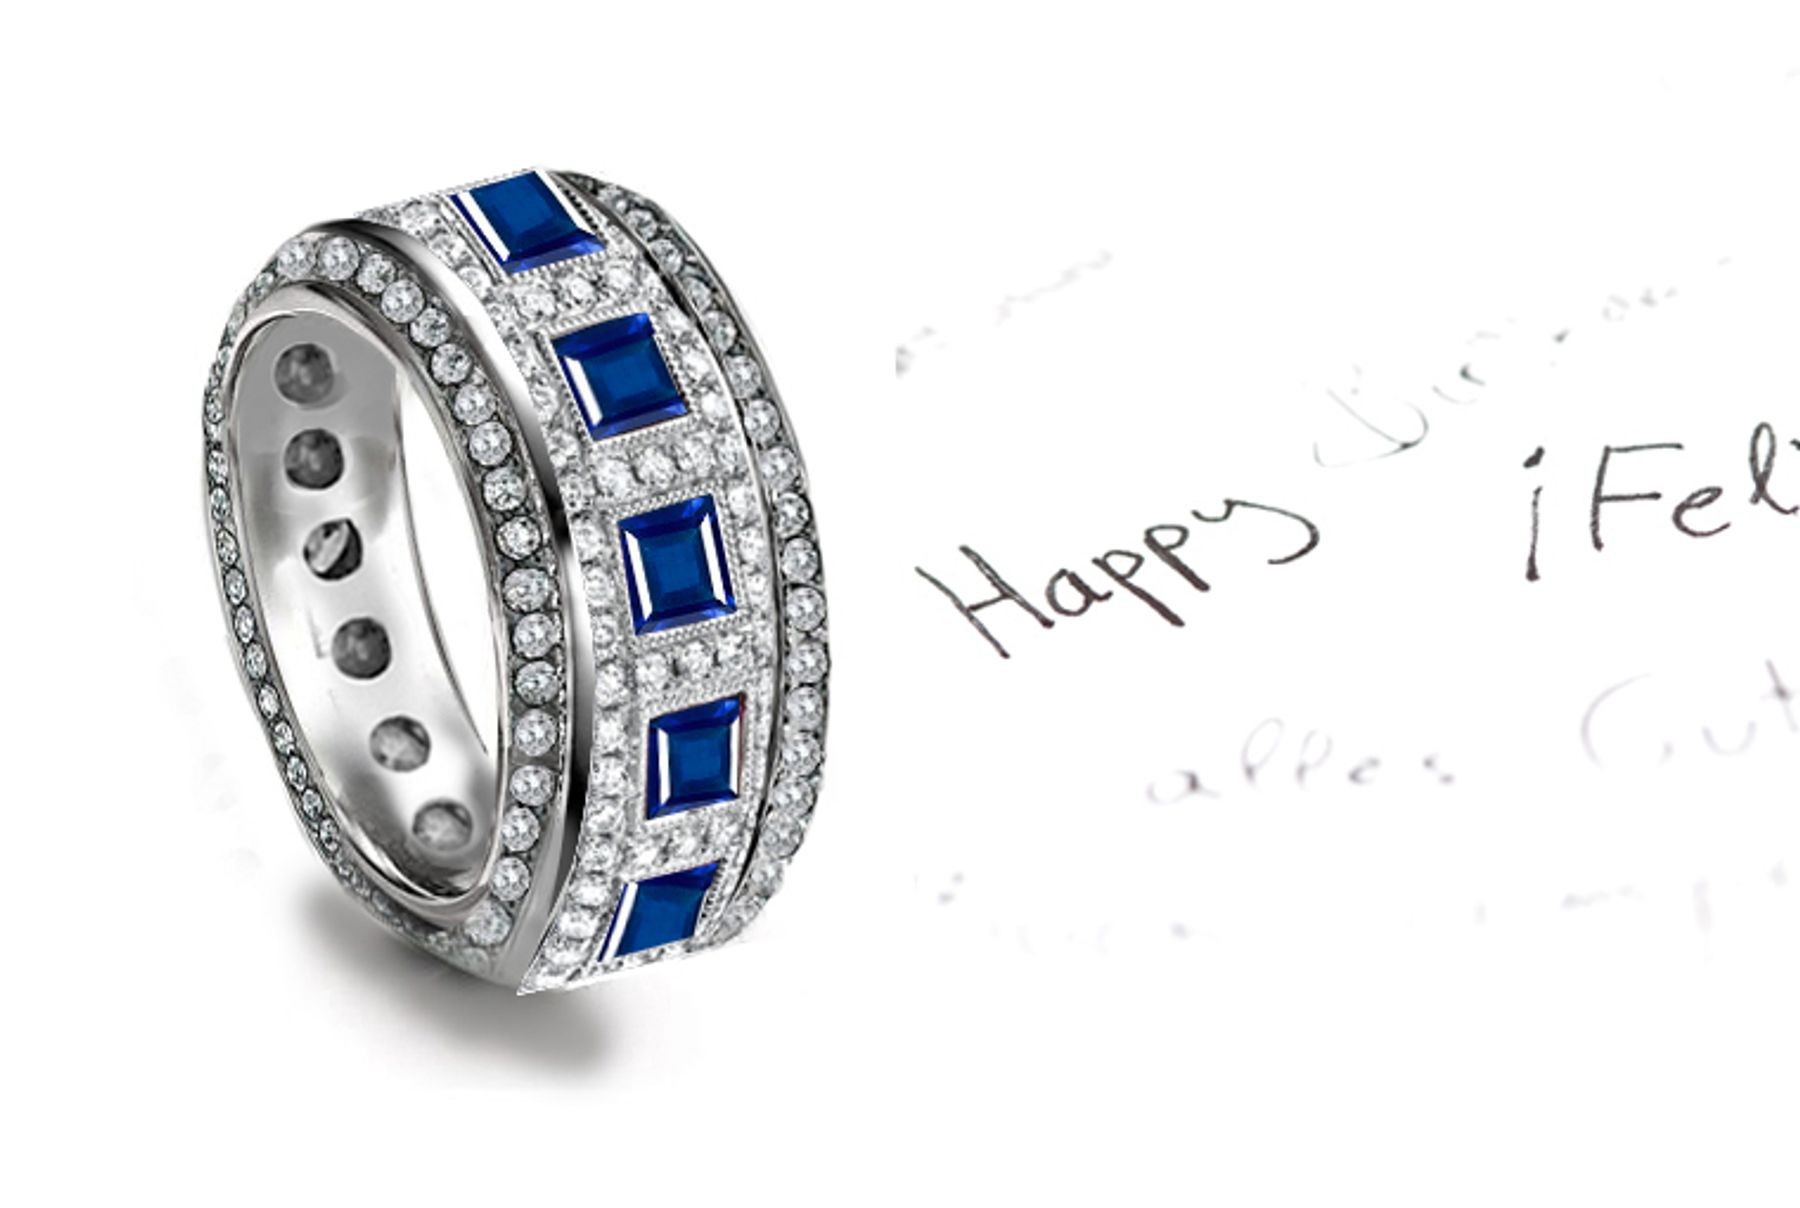 Princess Cut Sapphire in center & Diamonds decorate the sides and center